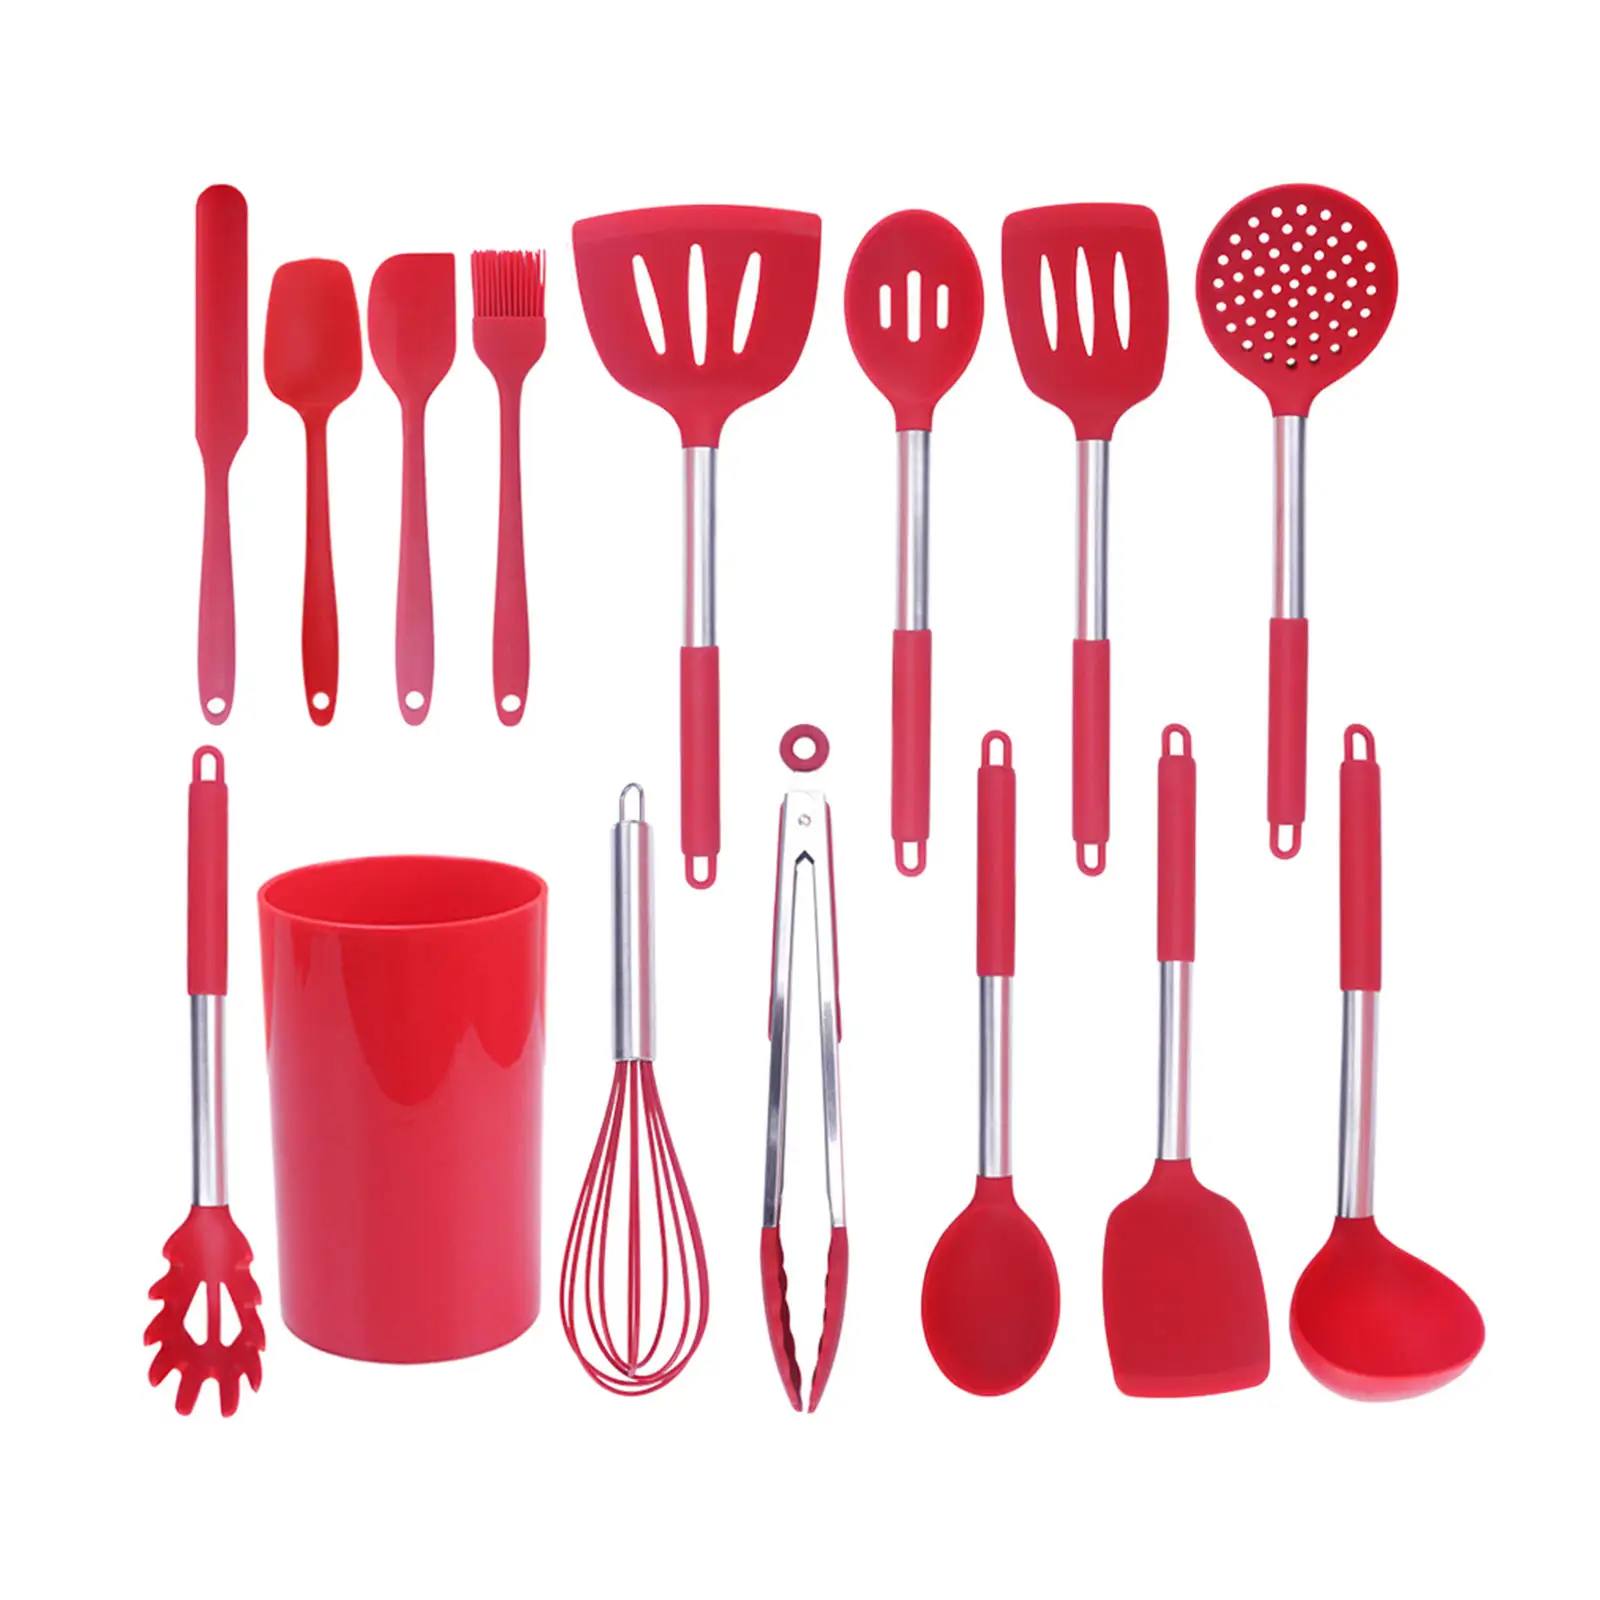 15 Pieces Cooking Utensils Set Silicone Handle Kitchen Utensils for Frying Kitchen Accessories